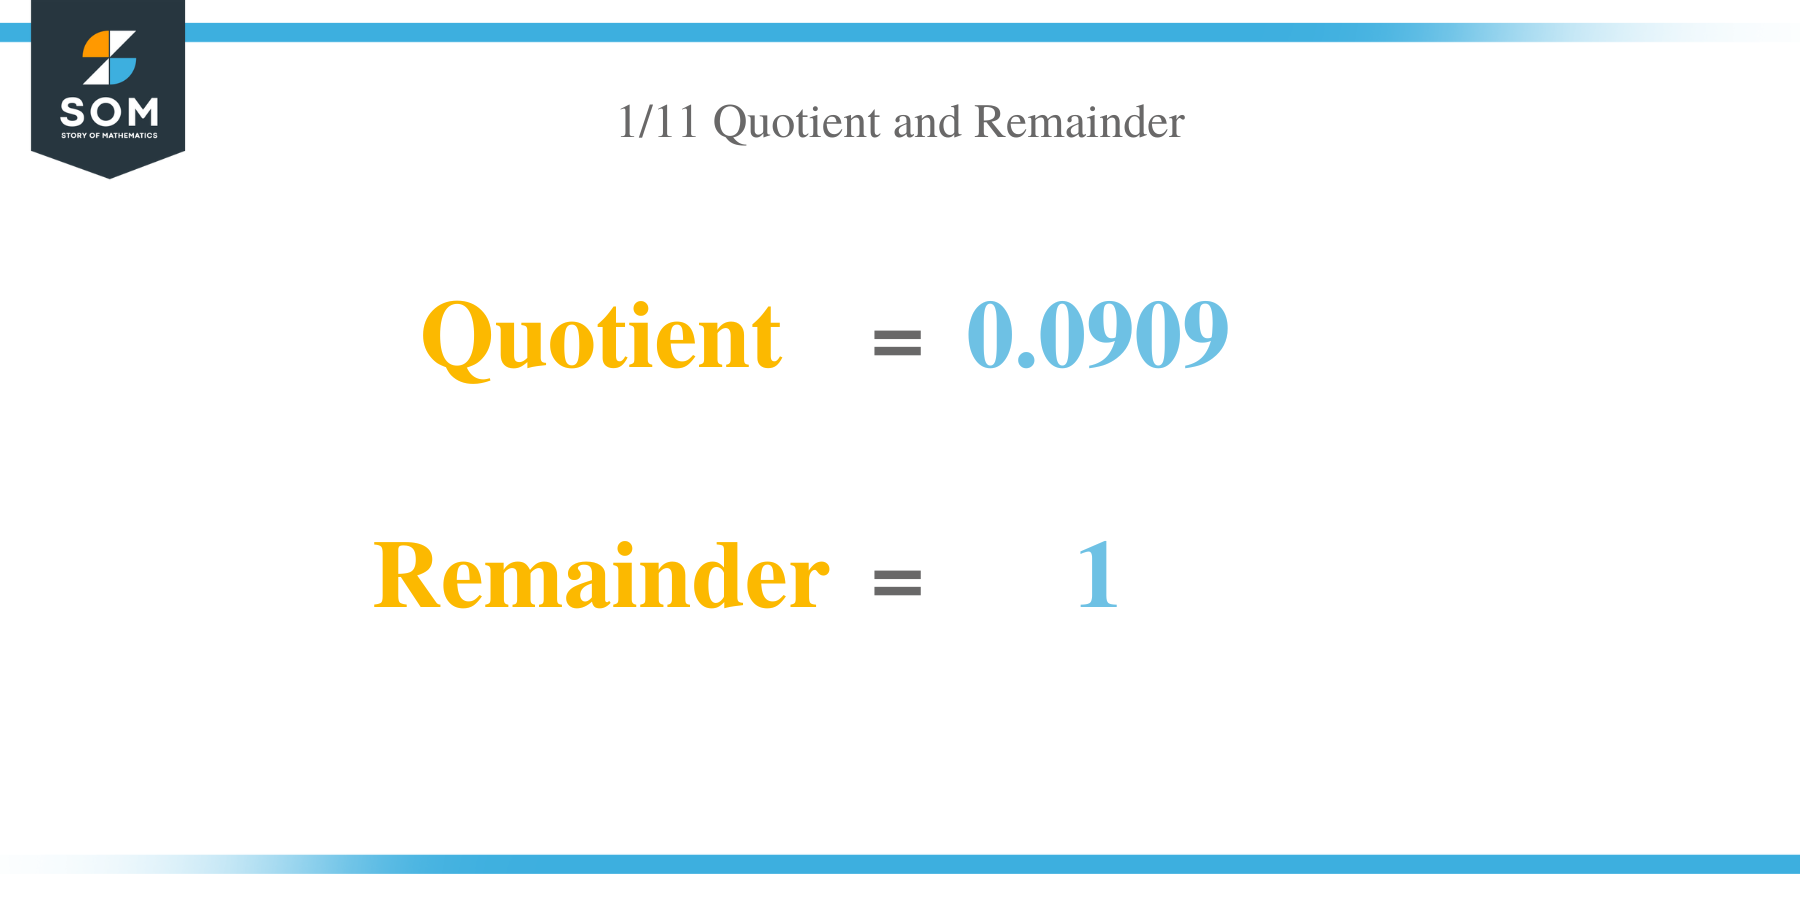 Quotient and Remainer of 1 per 11